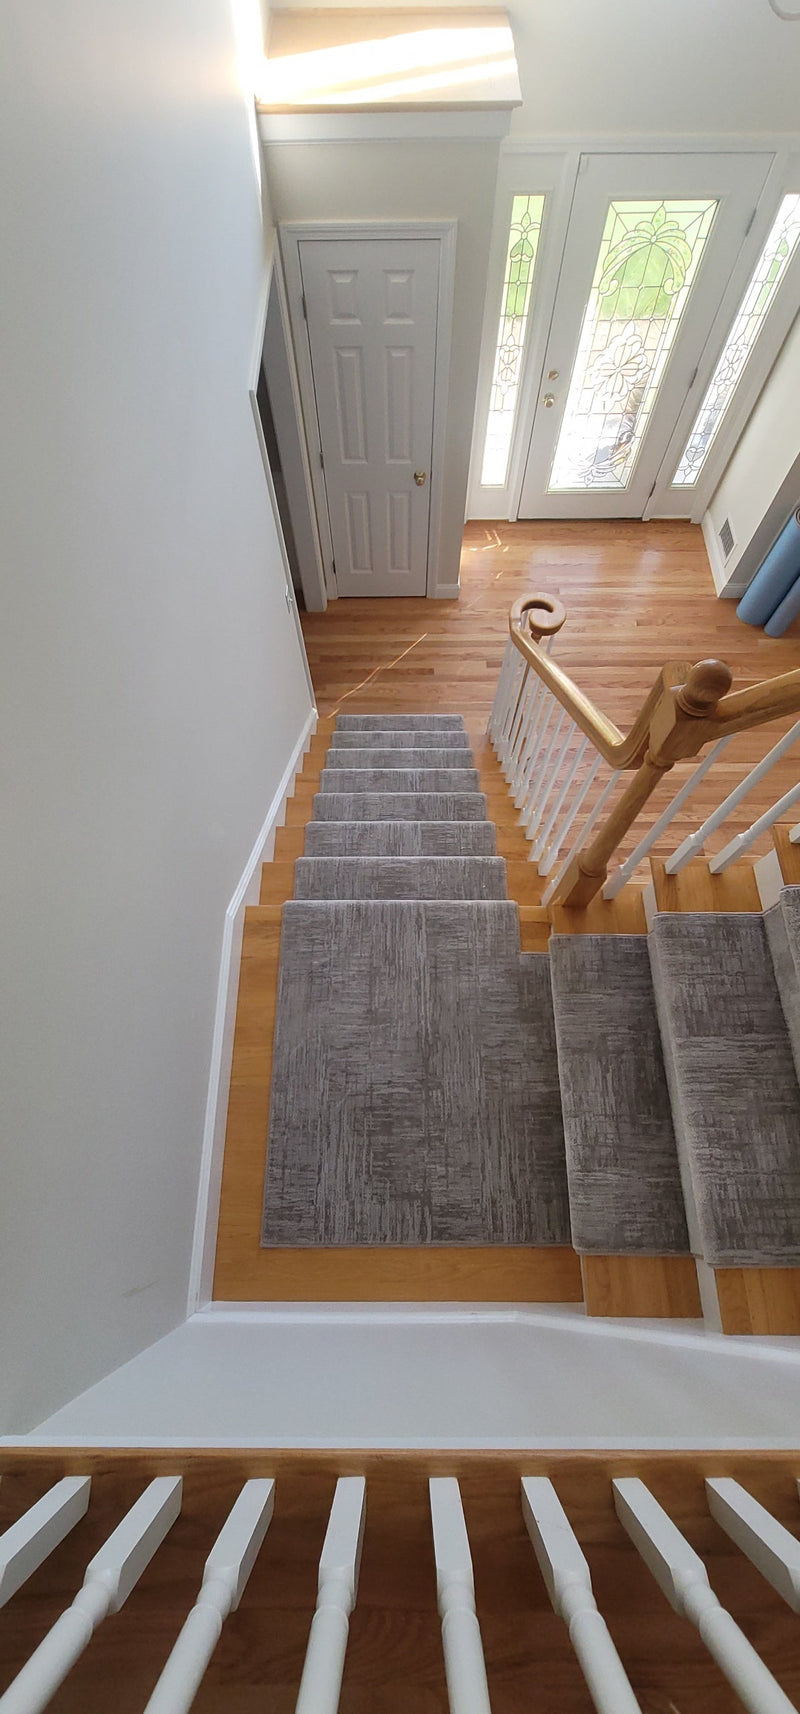 Shaw Carpet Insightful Journey CC71B-126 Stair Treads-Stair Runners and Matching Area Rugs